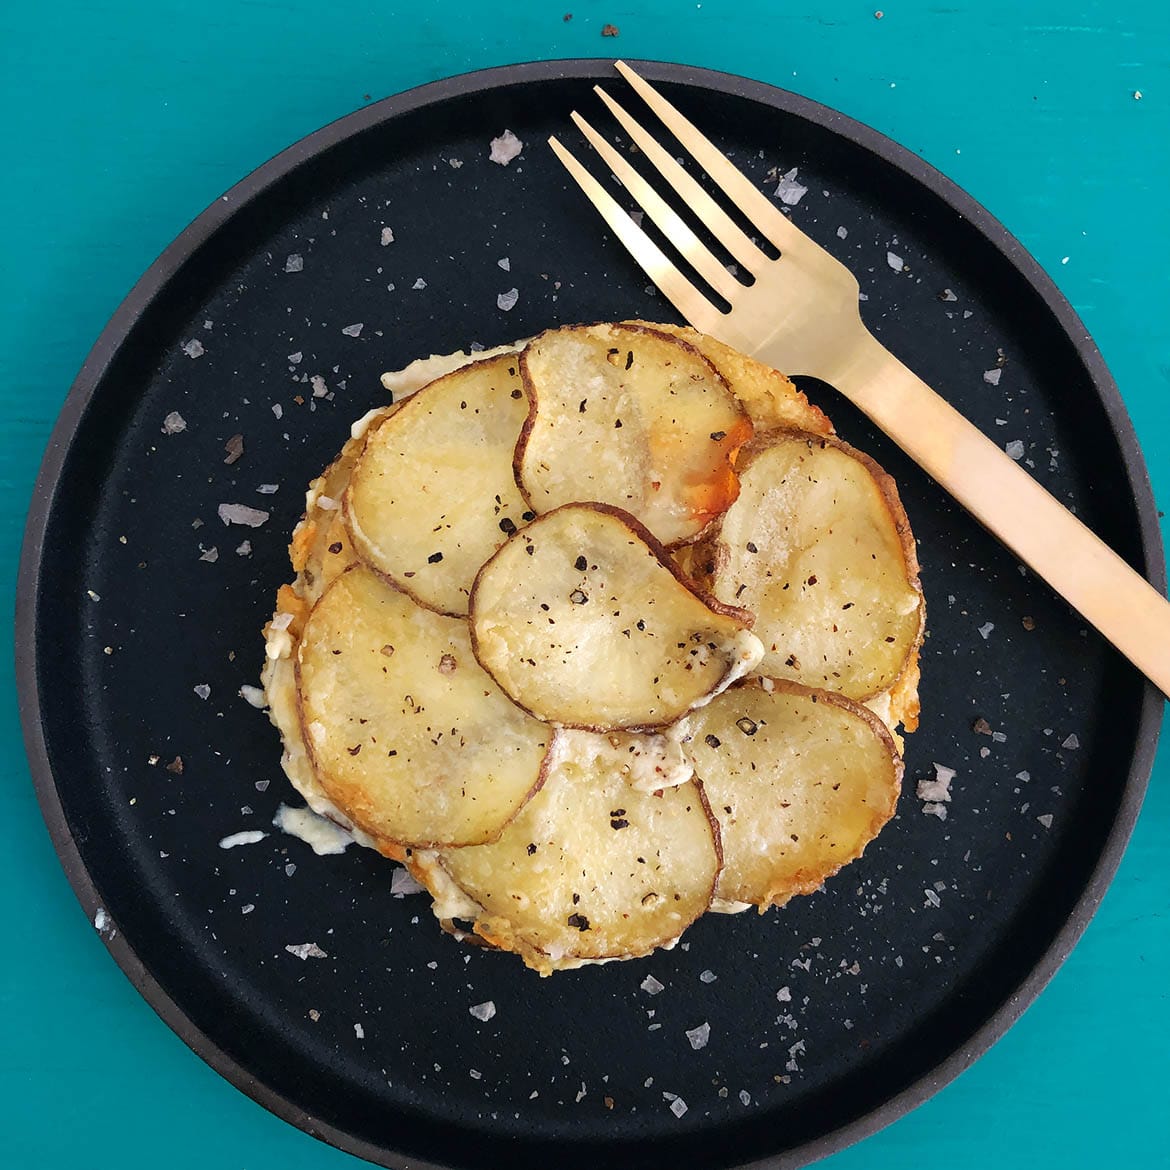 Top-down view of scalloped potatoes on a black plate with a gold fork